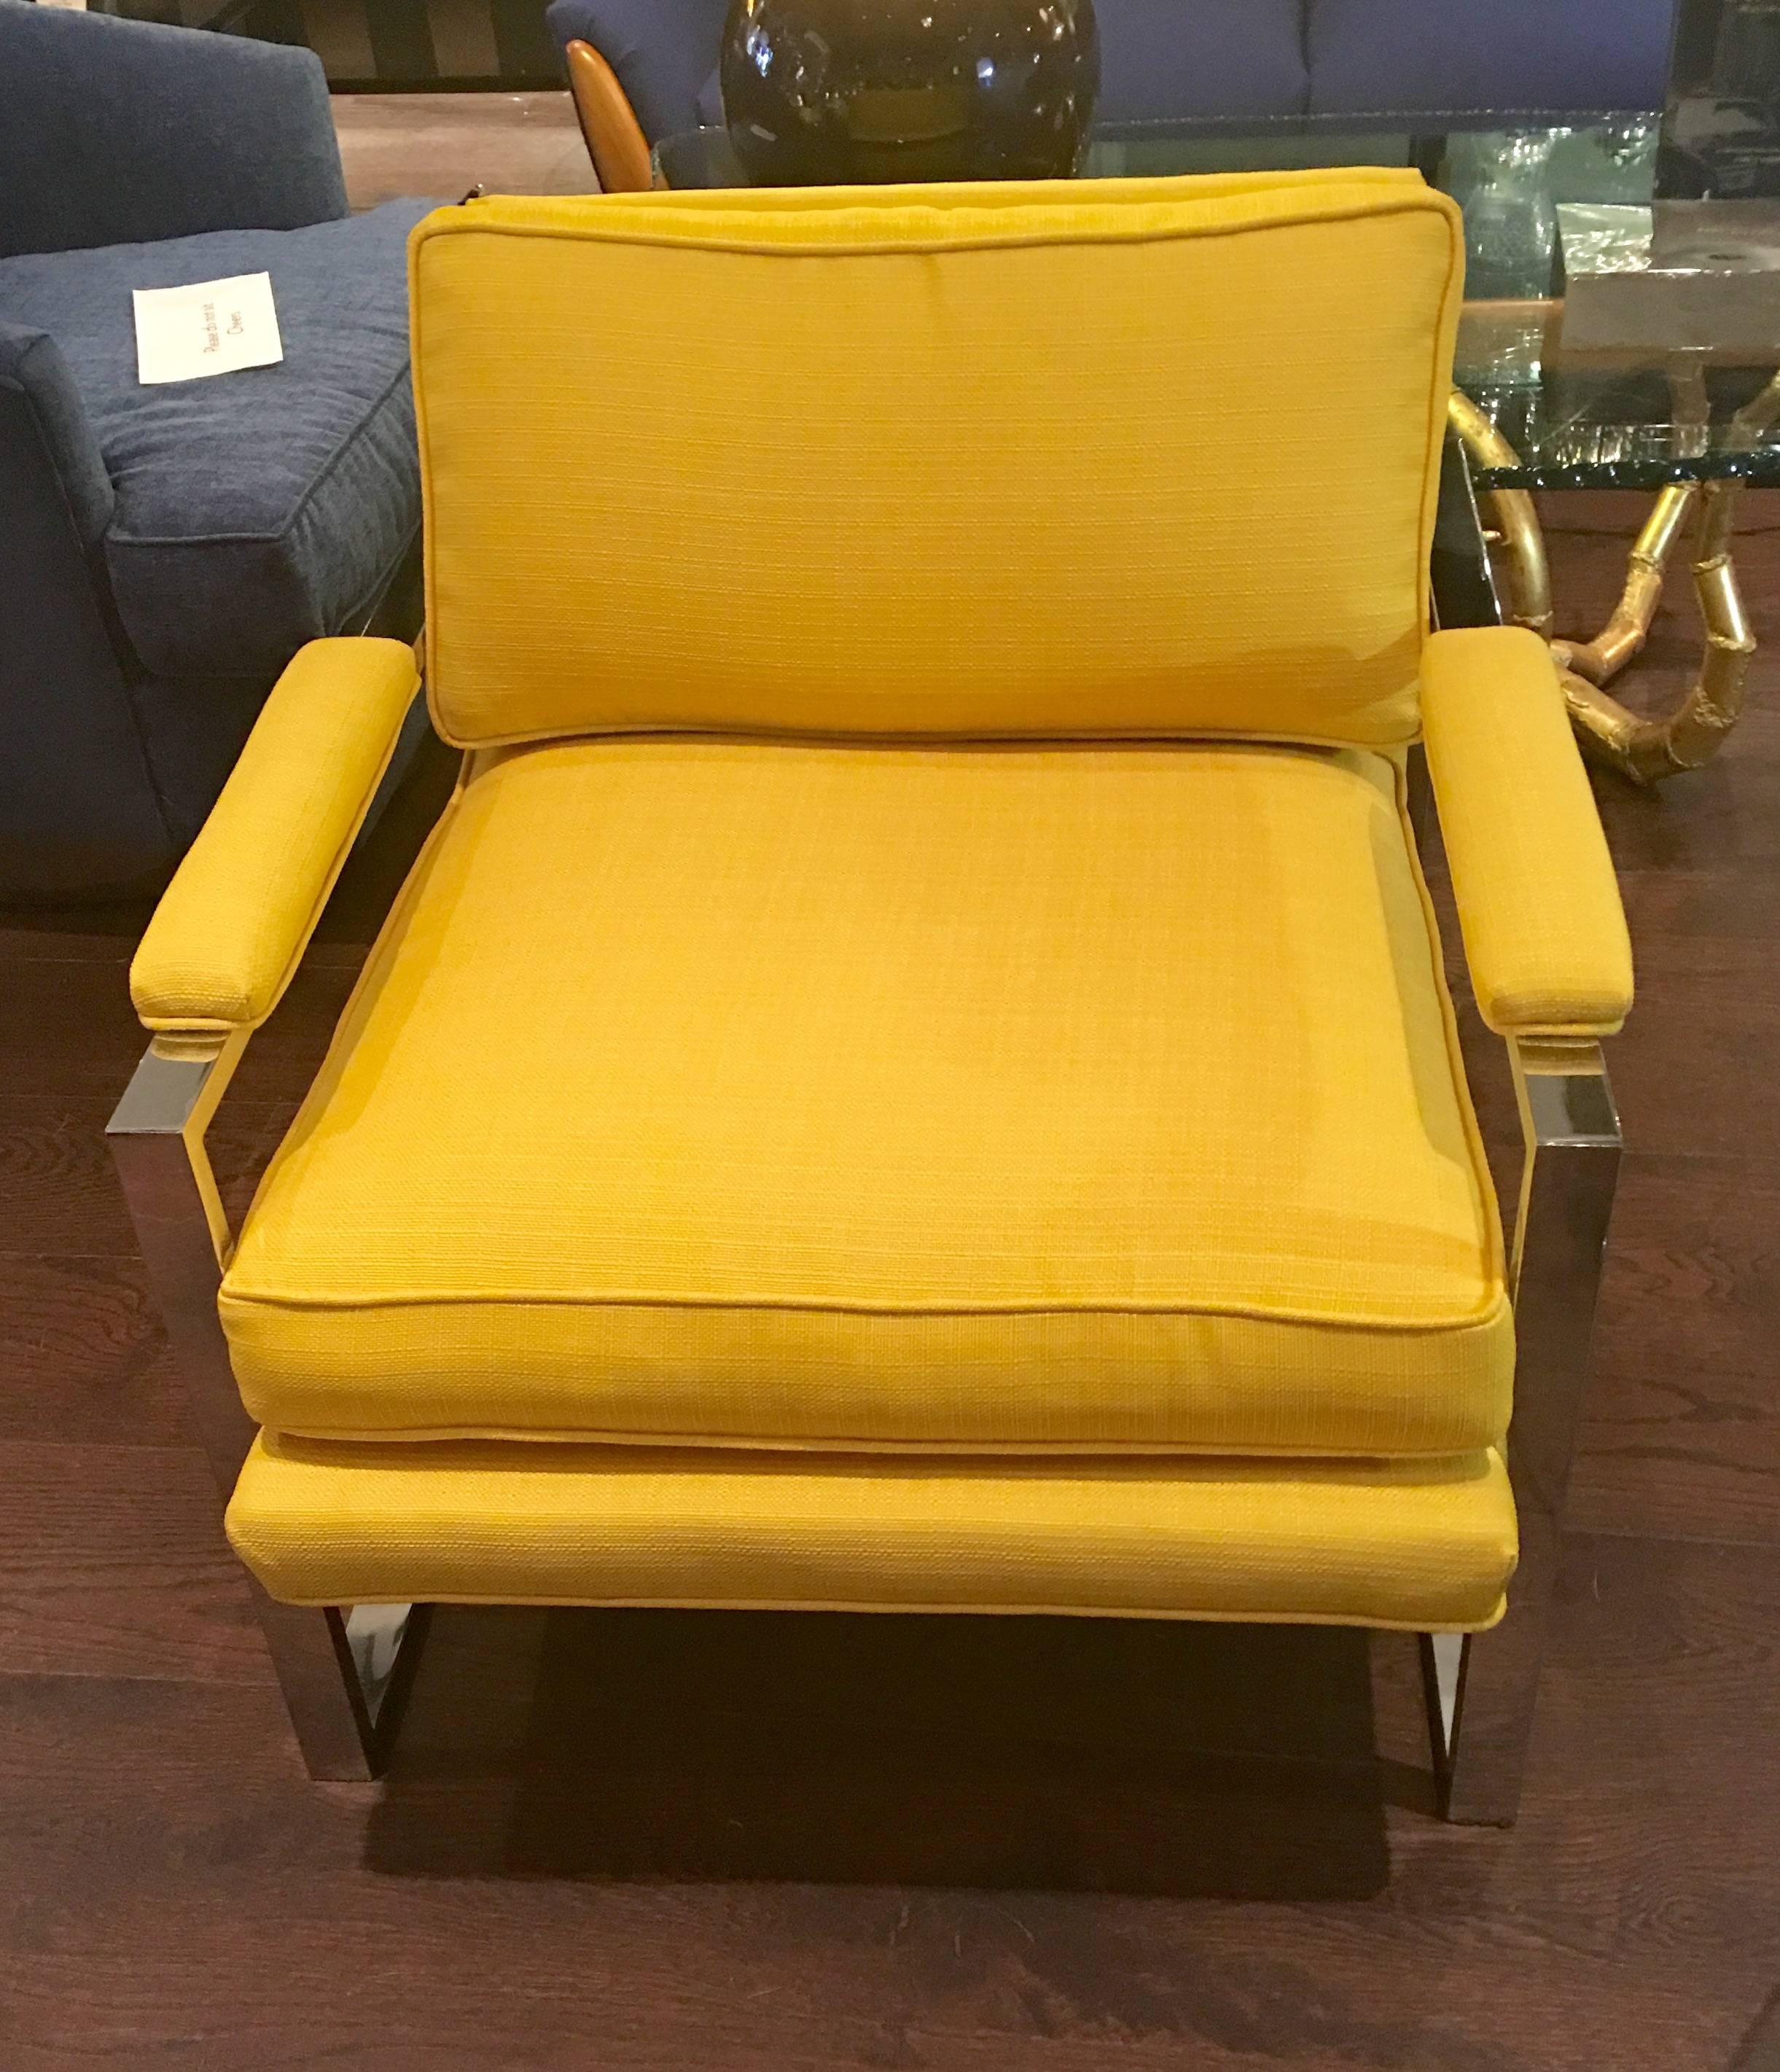 A pair of Mid-Century Modern lounge chairs designed by Milo Baughman. Chrome frame with vibrant yellow newly upholstered fabric.